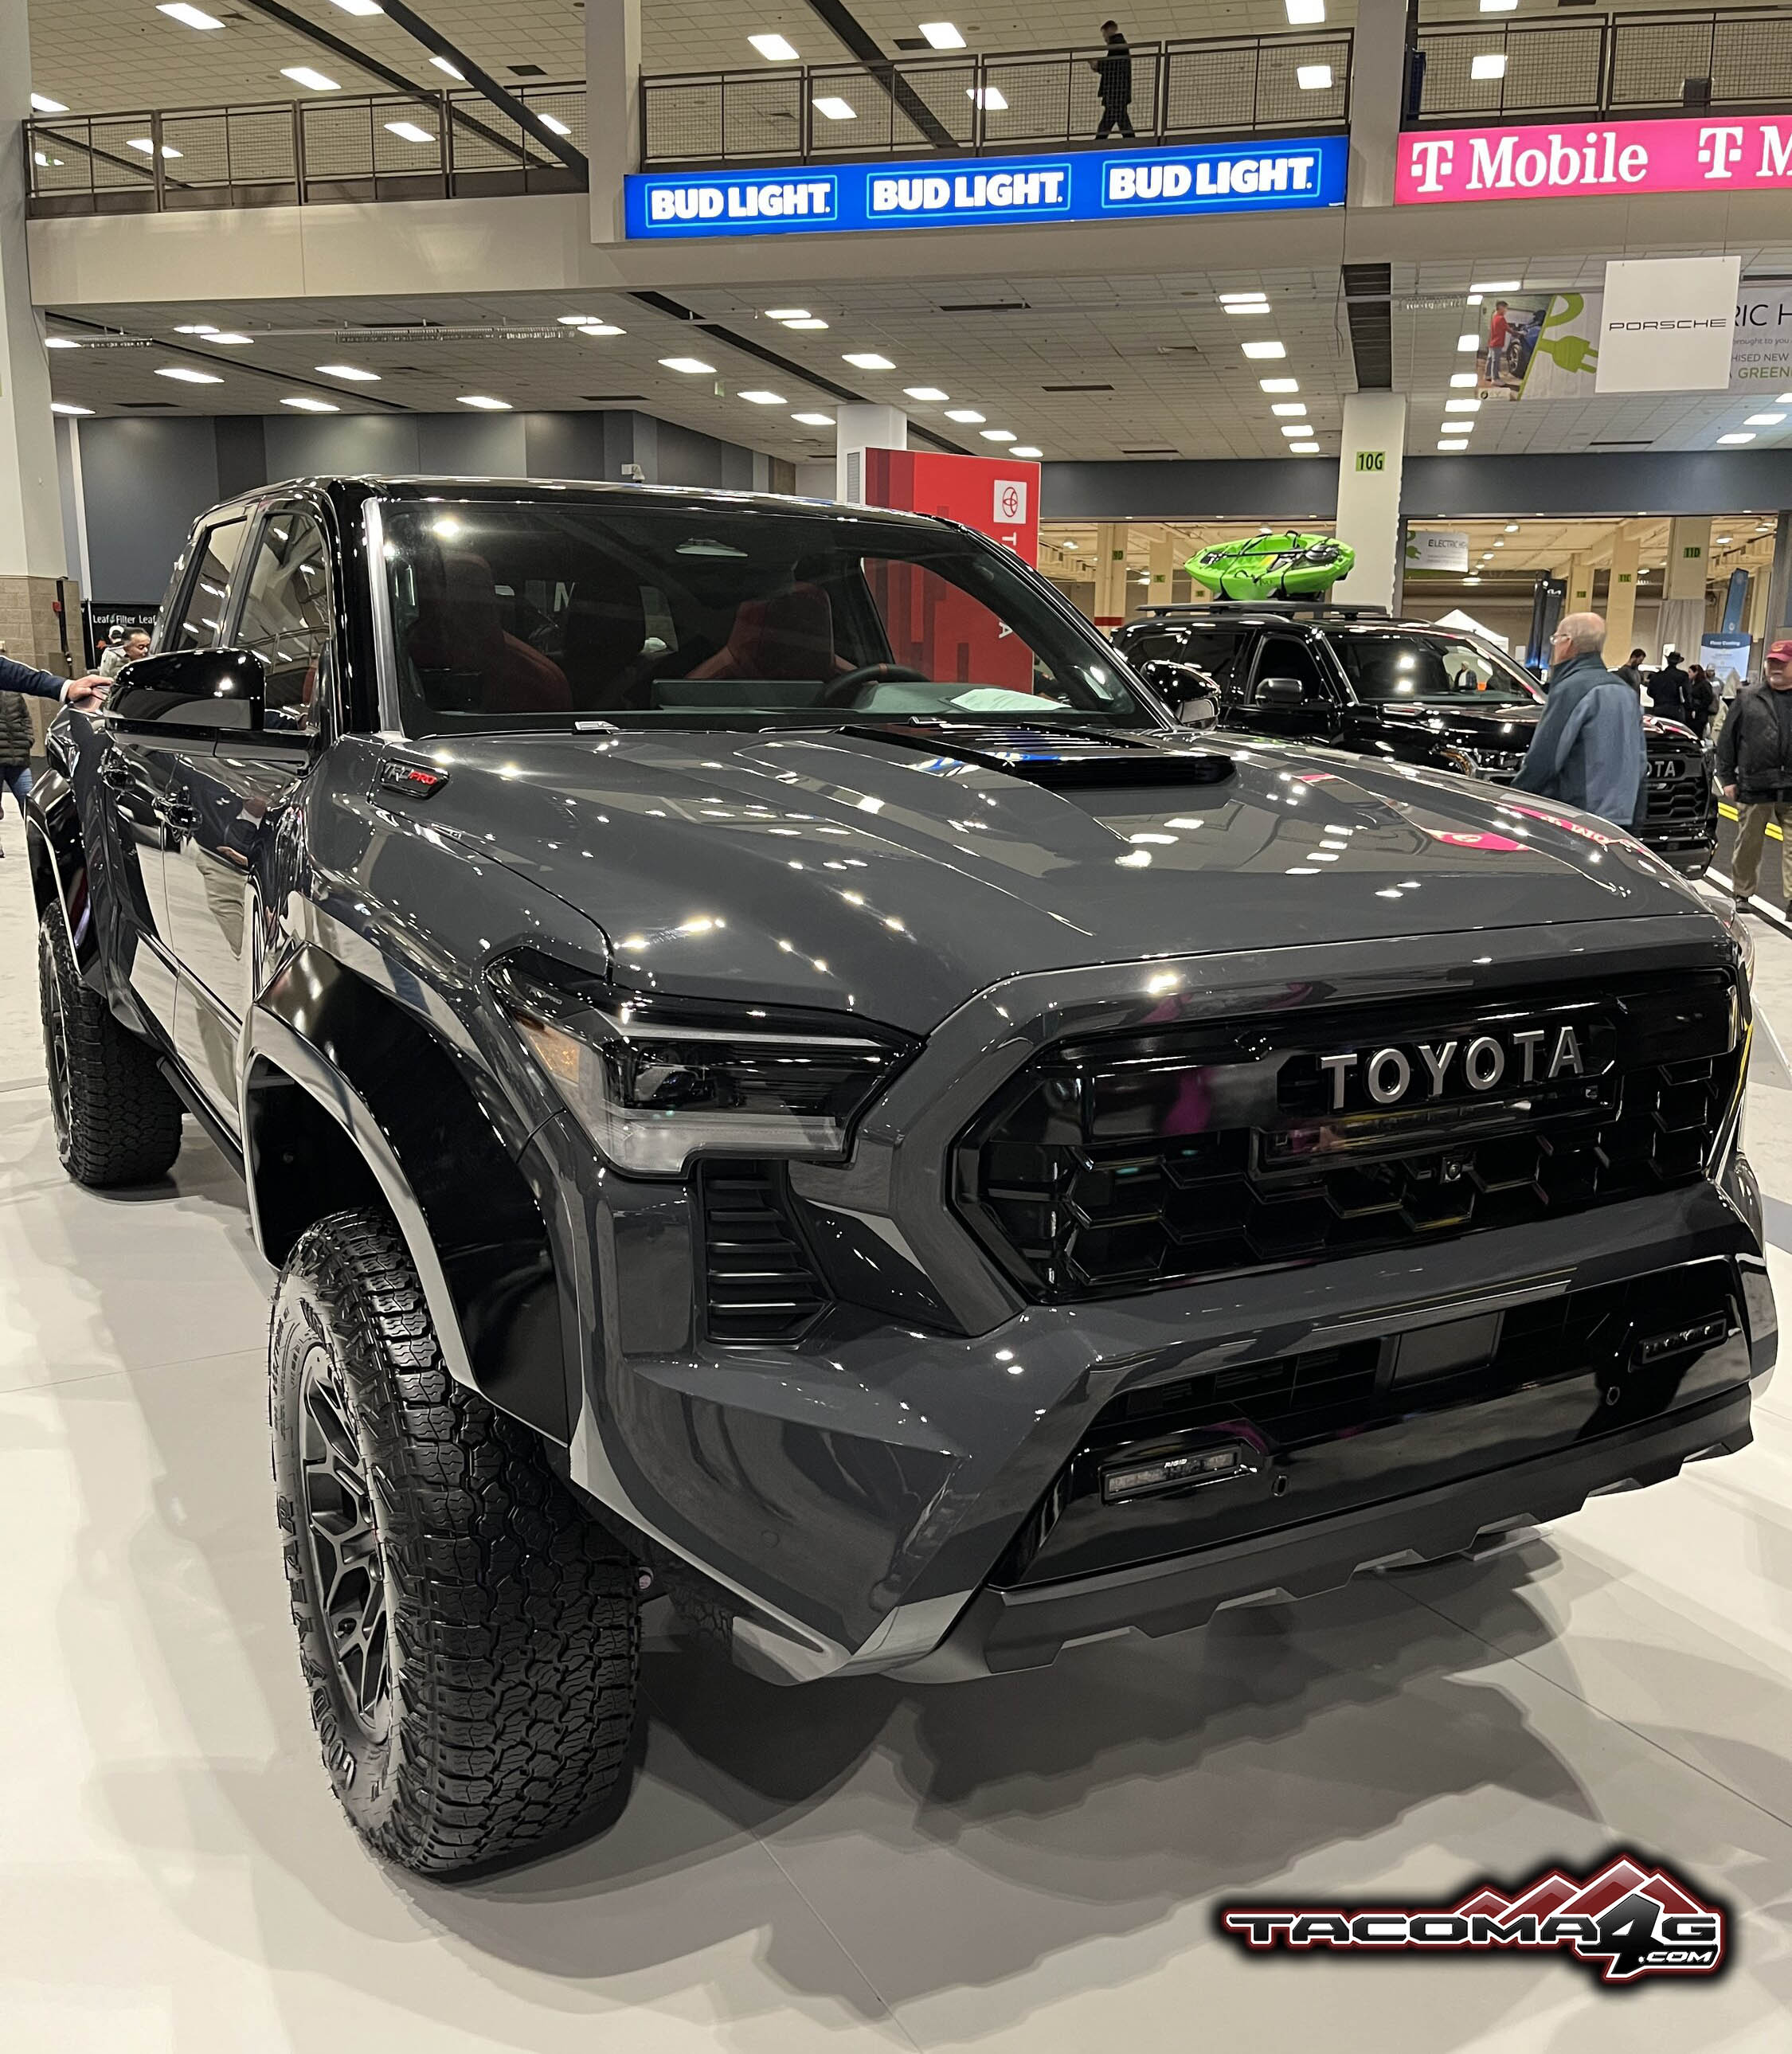 2024 Tacoma 2024 Tacoma TRD Pro in Underground Color at Seattle Auto Show IMG_9056